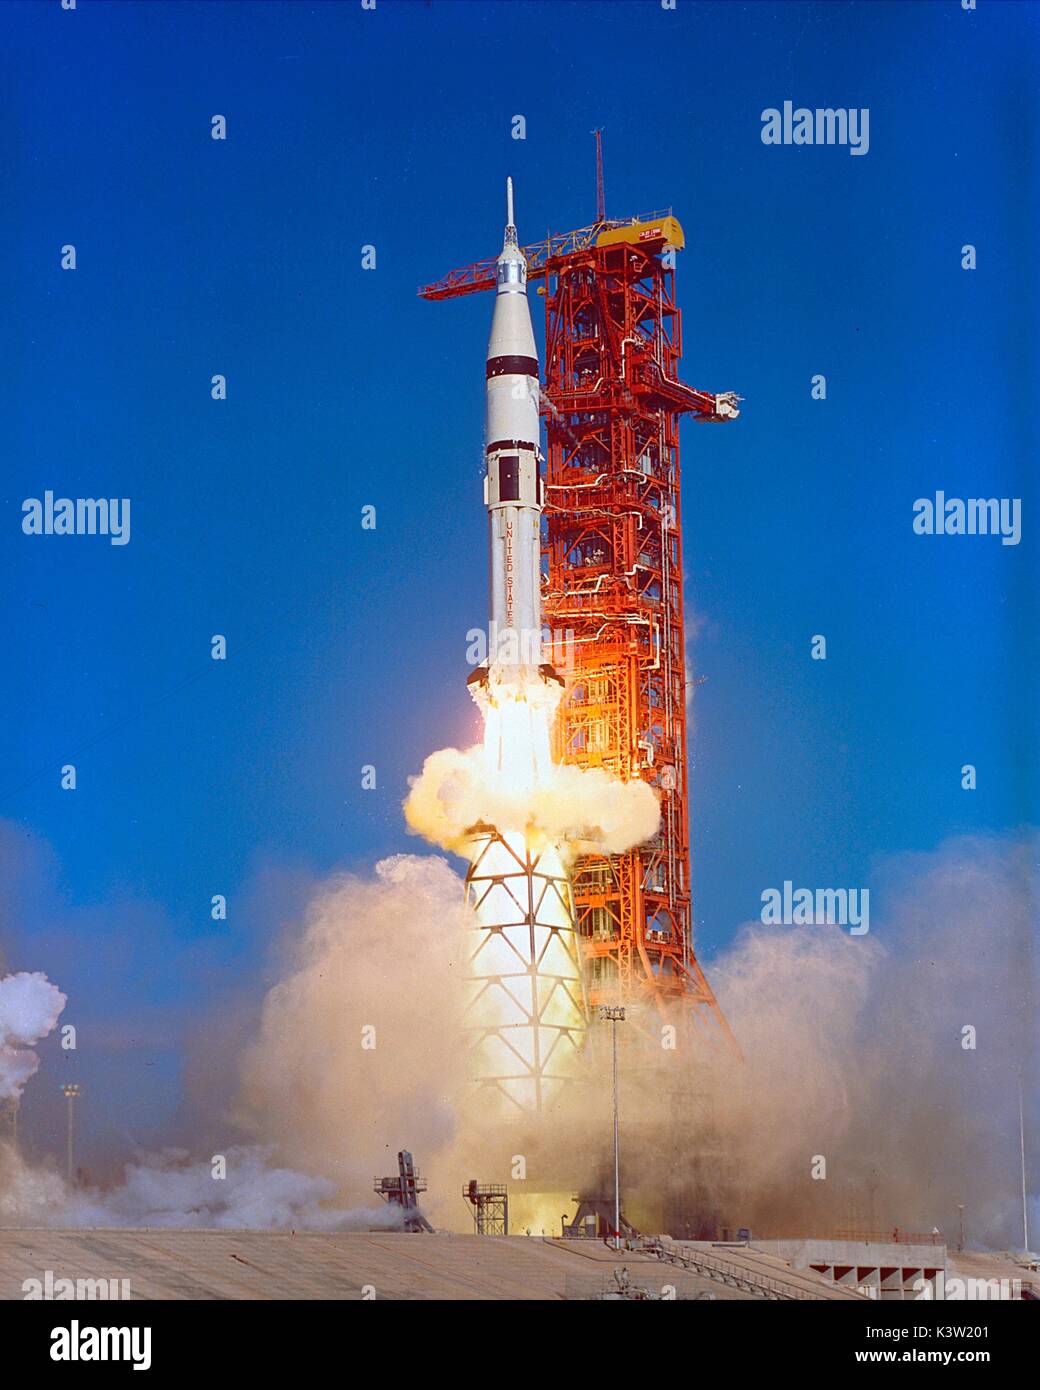 The NASA Skylab 4 mission Saturn IB launch vehicle lifts off from the Kennedy Space Center Launch Complex 39B November 16, 1973 in Merritt Island, Florida.   (photo by NASA via Planetpix) Stock Photo